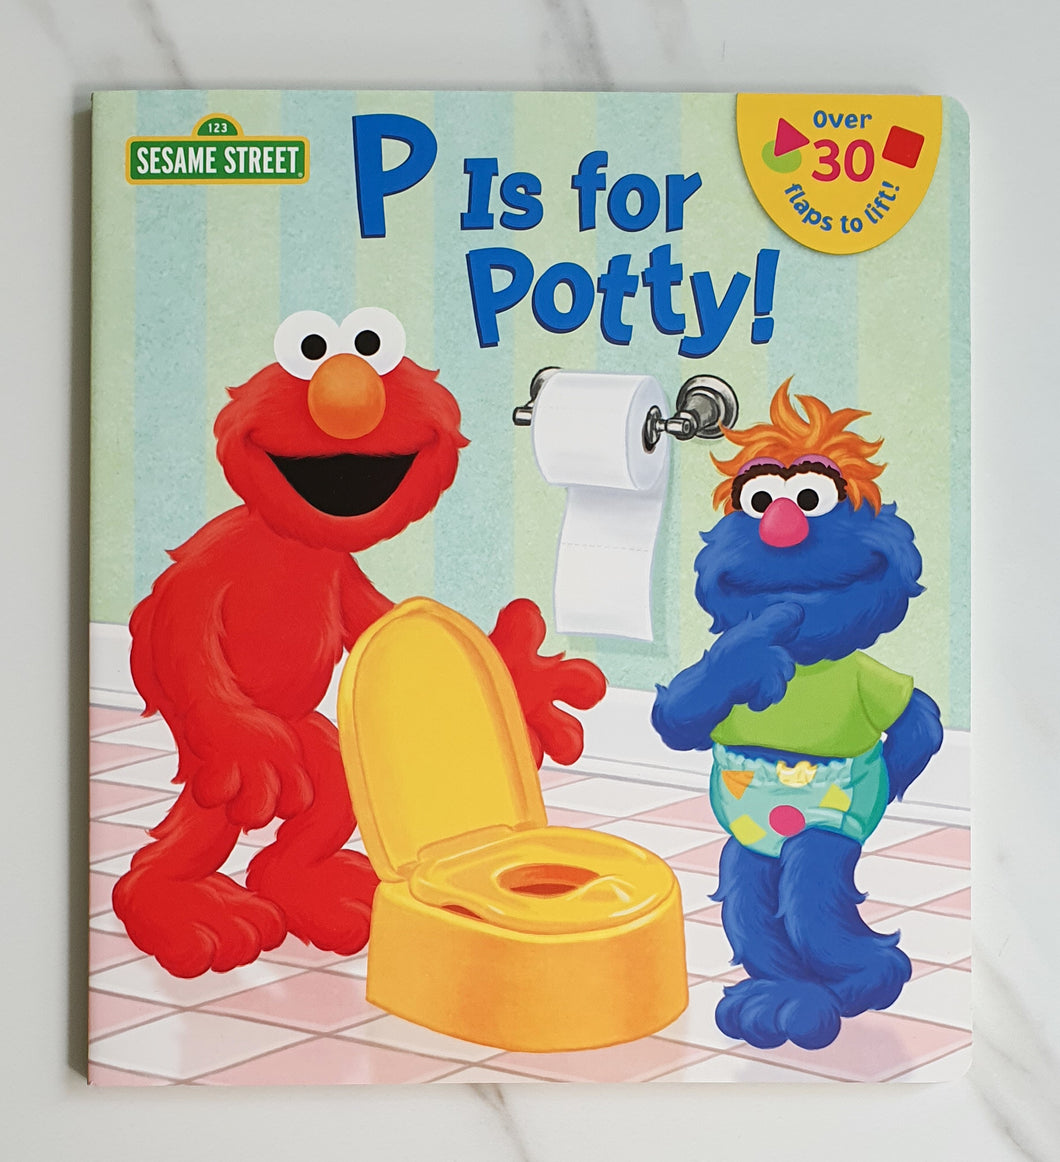 P IS FOR POTTY!